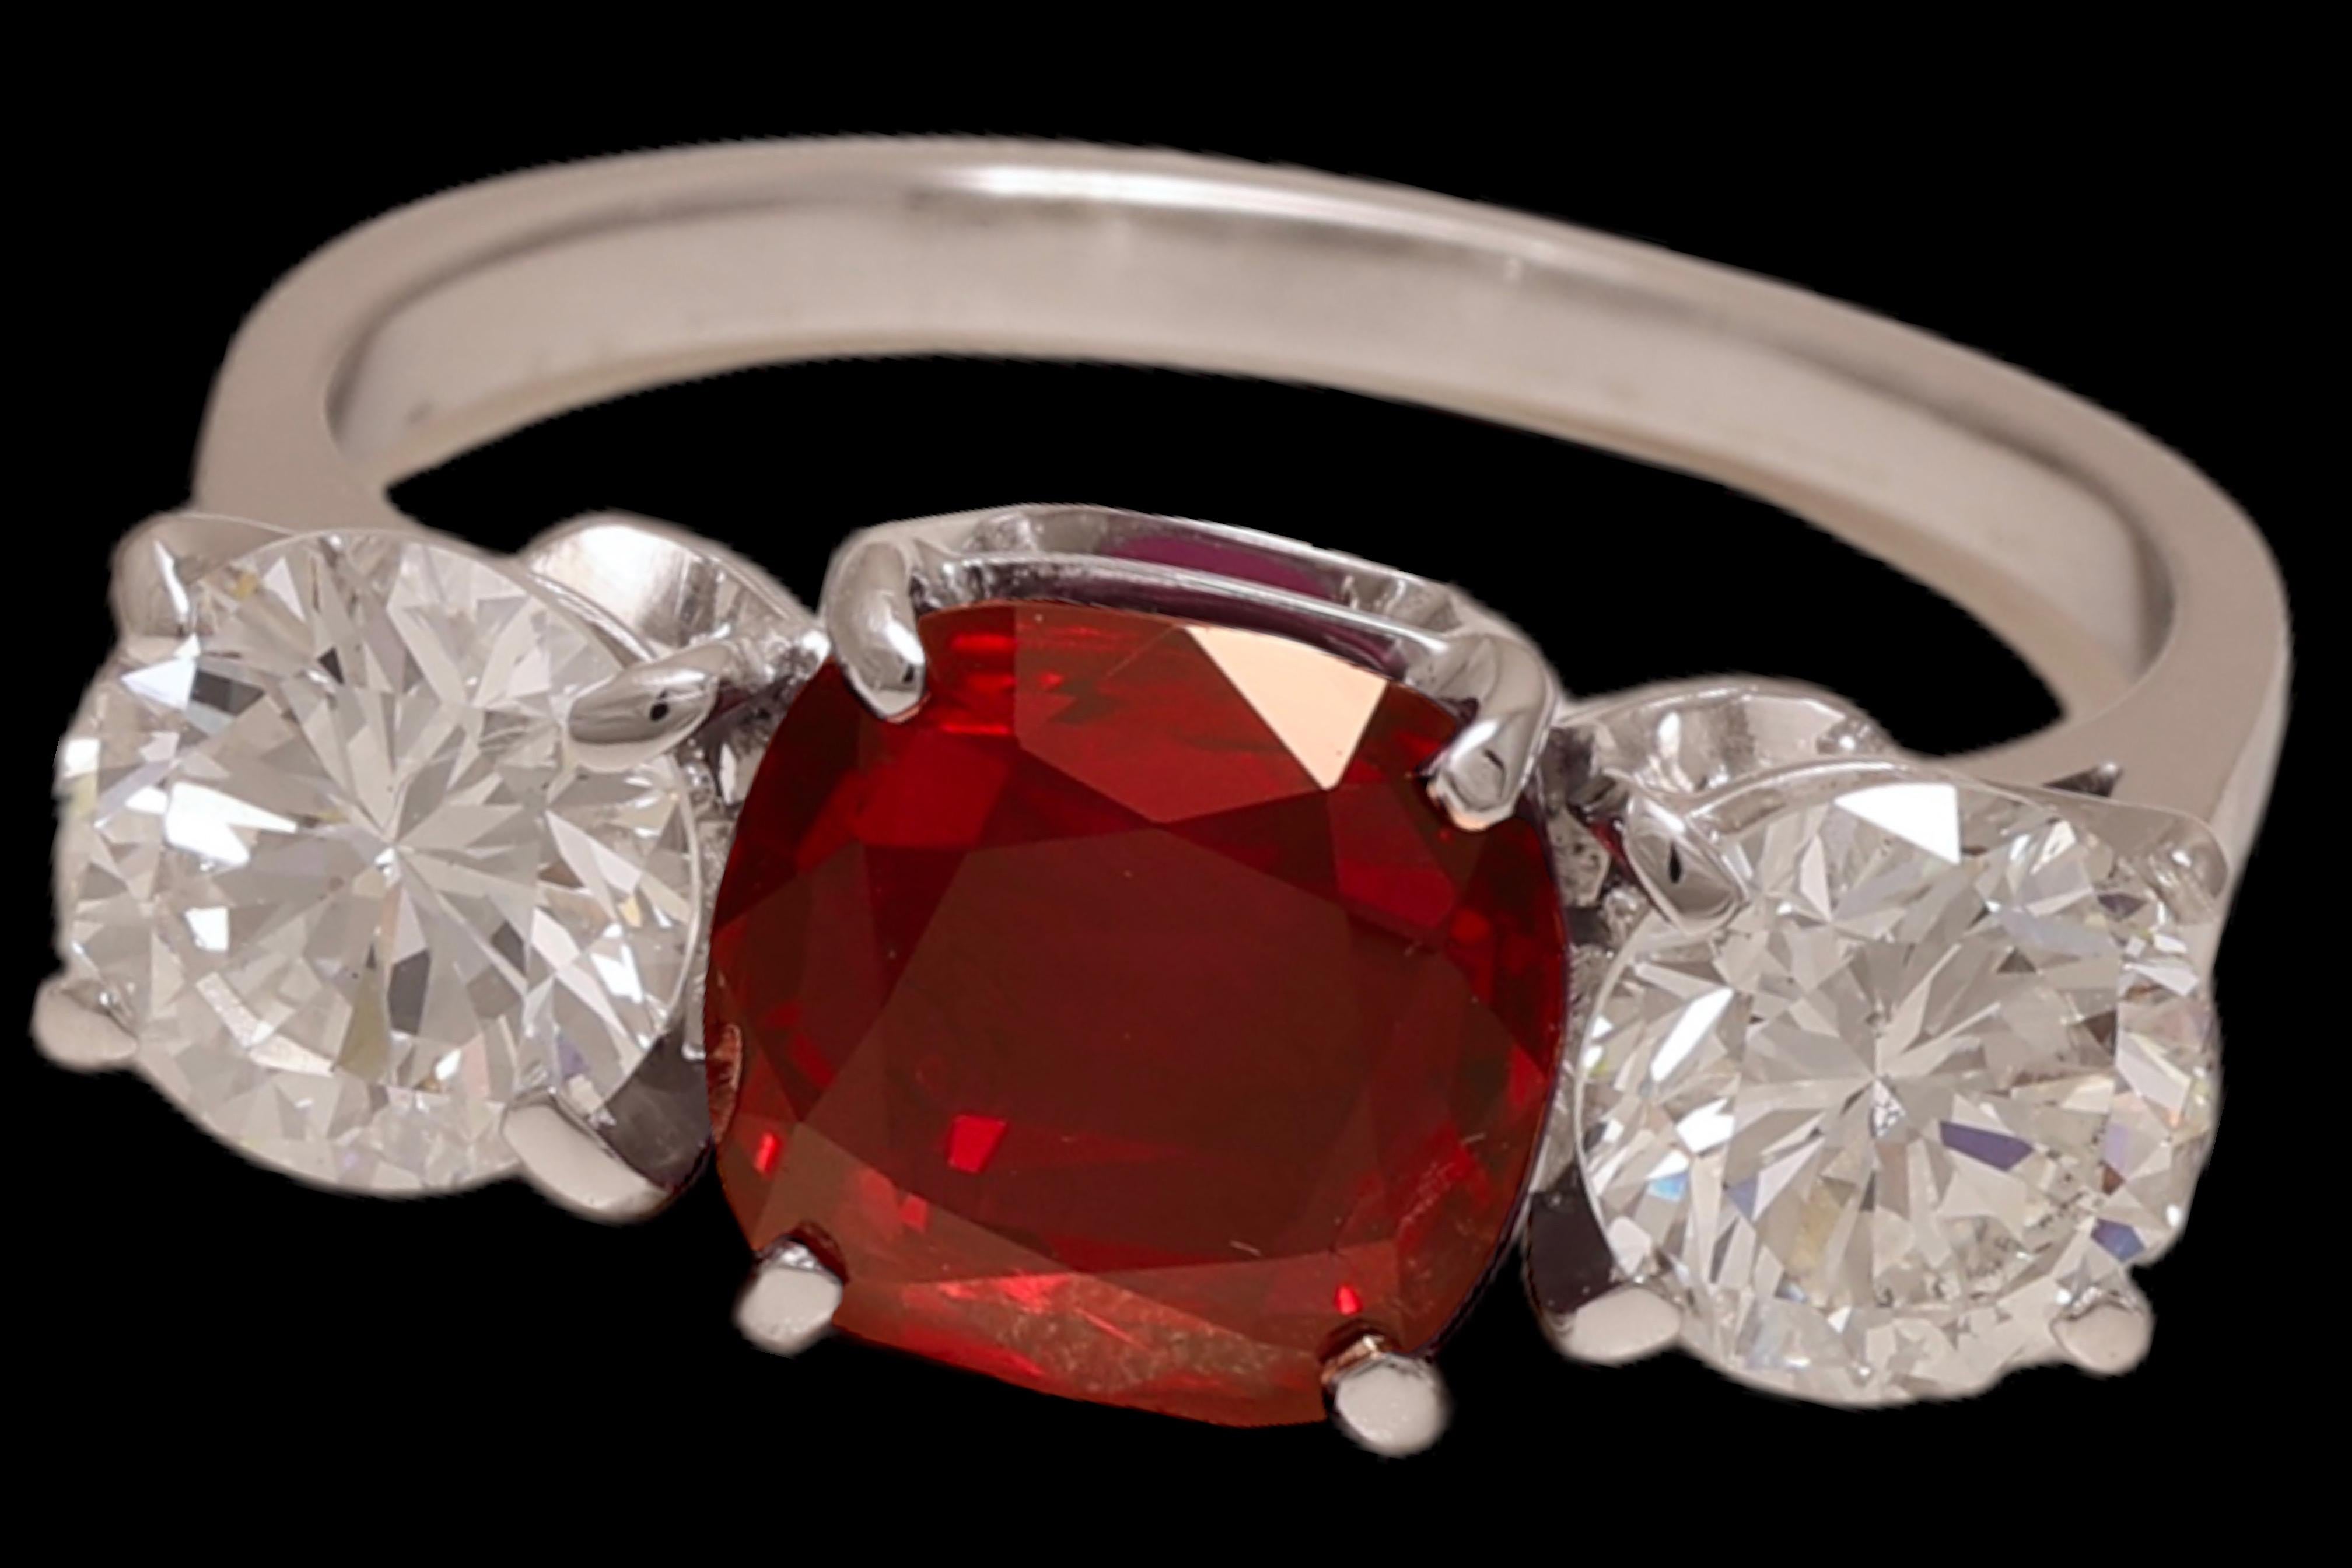 Magnificant 18 kt. White Gold Trilogy Ring with 2.2 ct. Vivid Red Ruby & 1.73 ct. Diamonds

Ruby: Natural brilliant cut / step cut cushion shape, Vivid Red Siam Ruby 2.2 ct.
Comes with a GRS certificate

Diamonds: 2 round brilliant cut diamonds,